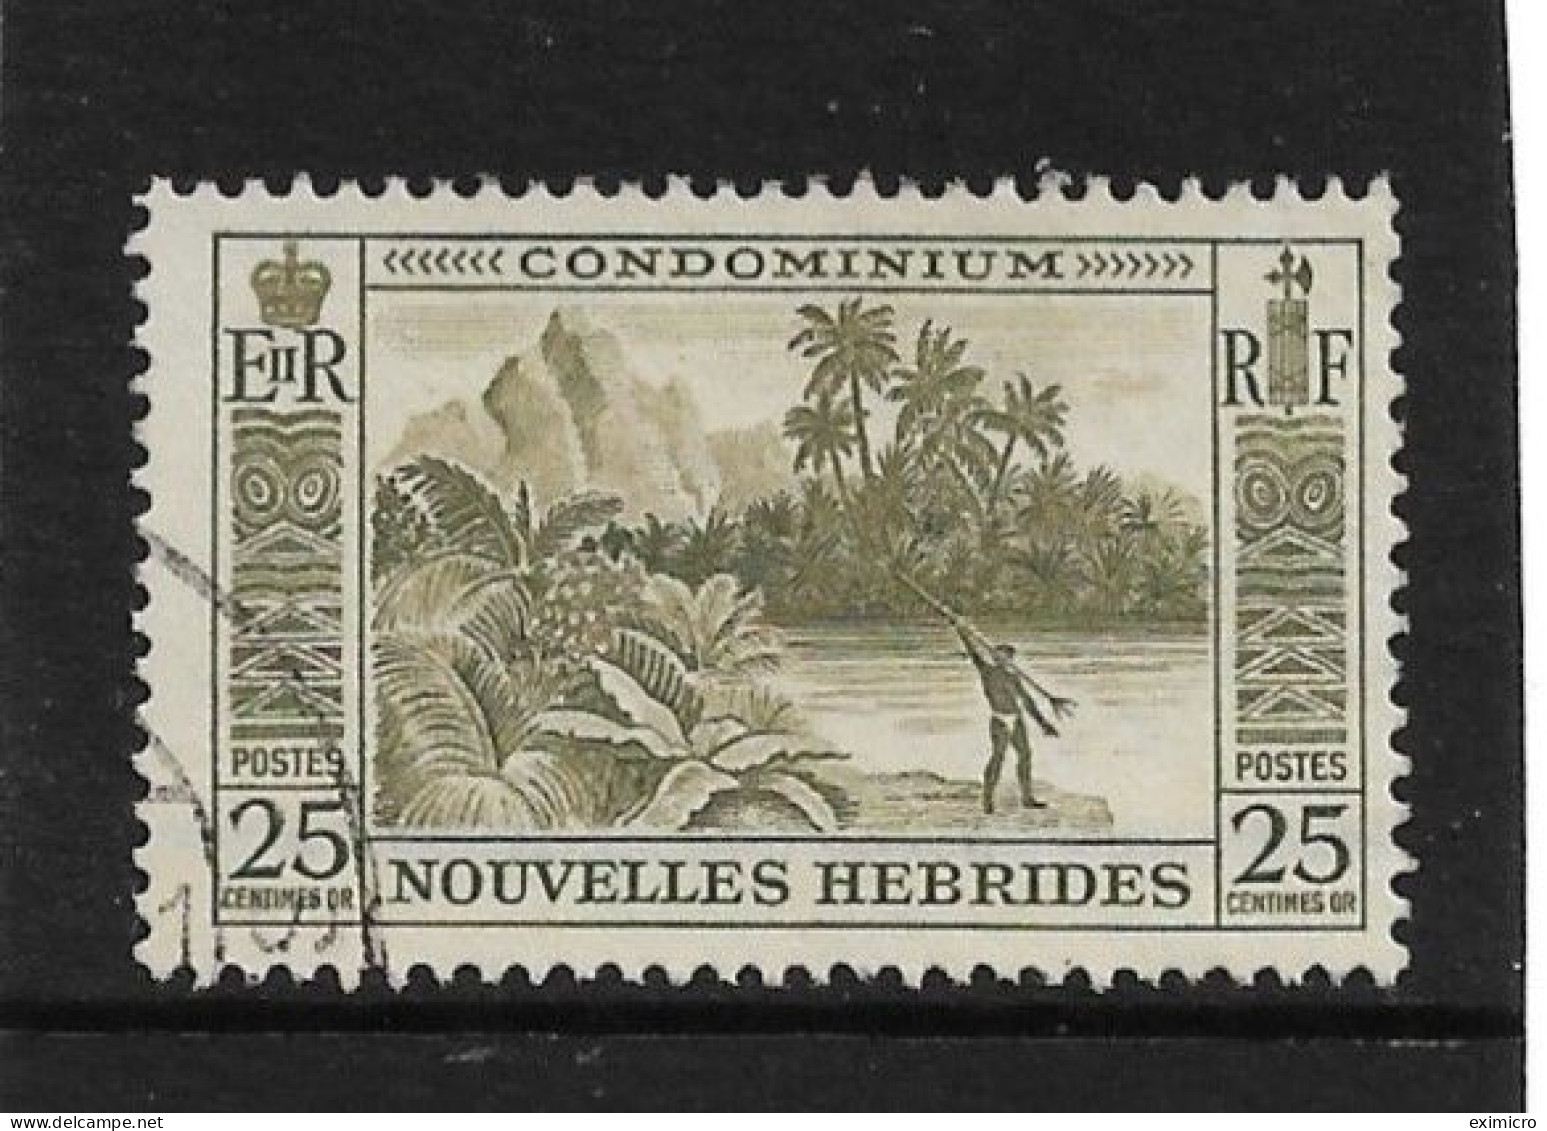 NEW HEBRIDES (FRENCH CURRENCY) 1957 25c SG F100 FINE USED - Gebraucht